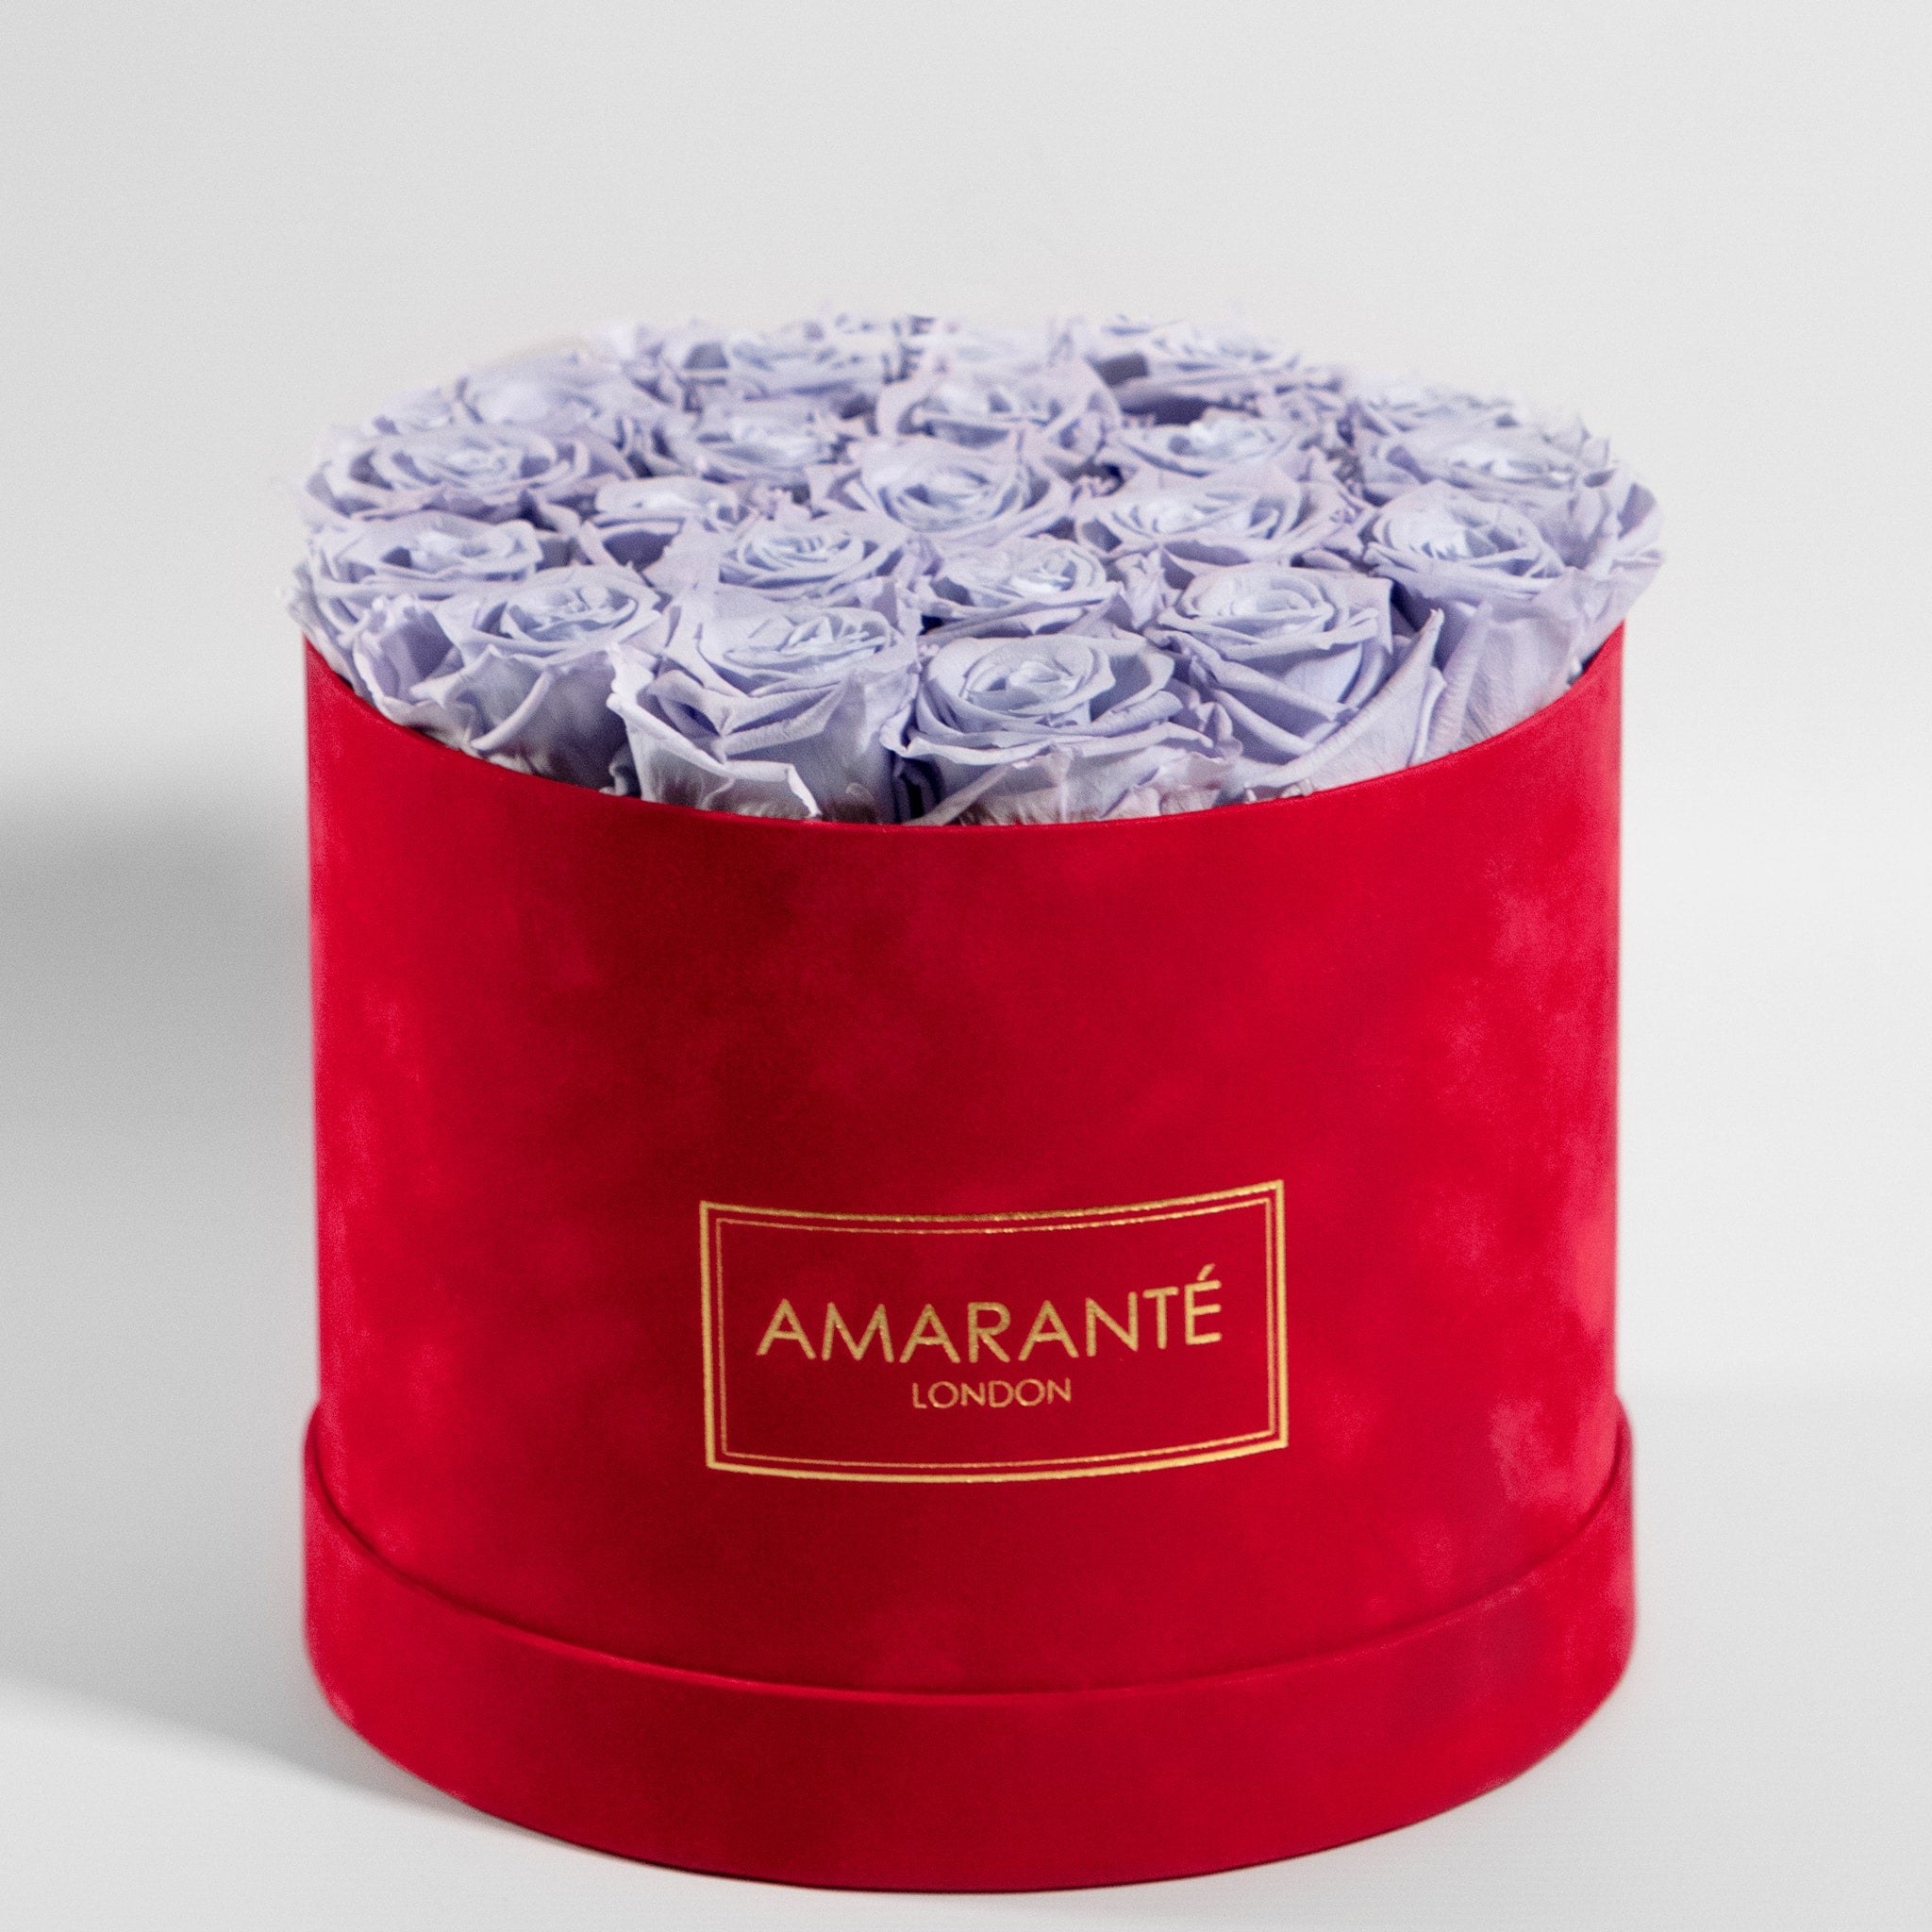 Fragrant lavender Roses imbedded in a magical red box